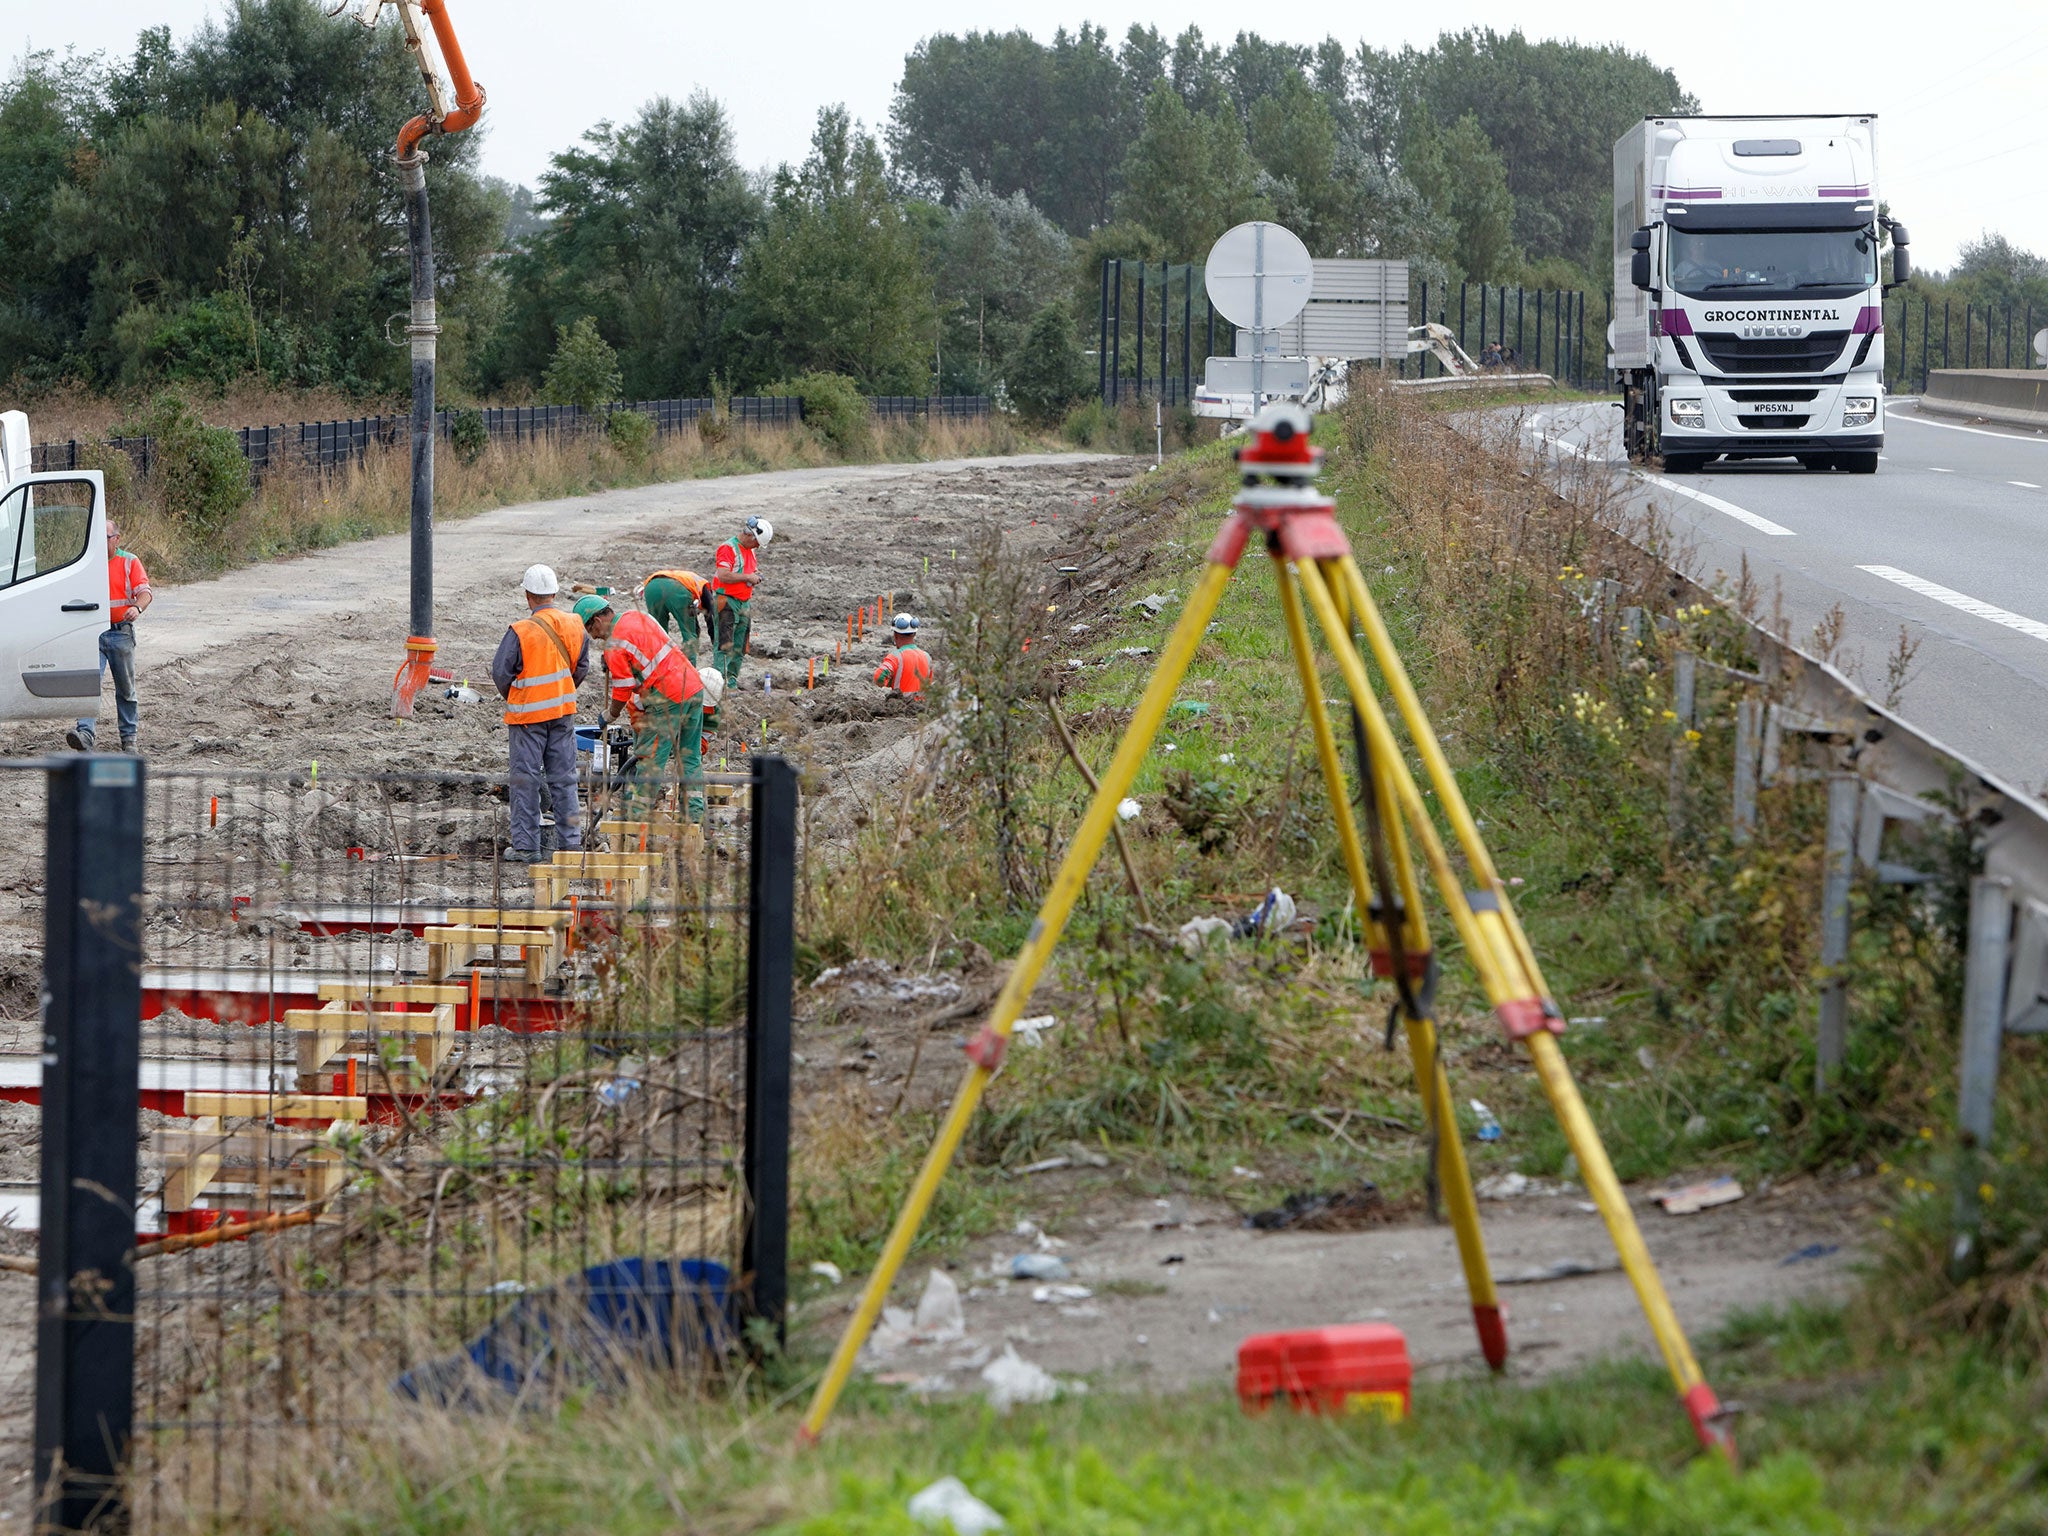 Workers dig foundations of a wall near Calais migrant Jungle camp along the road leading to the harbour of Calais on September 26, 2016 in France